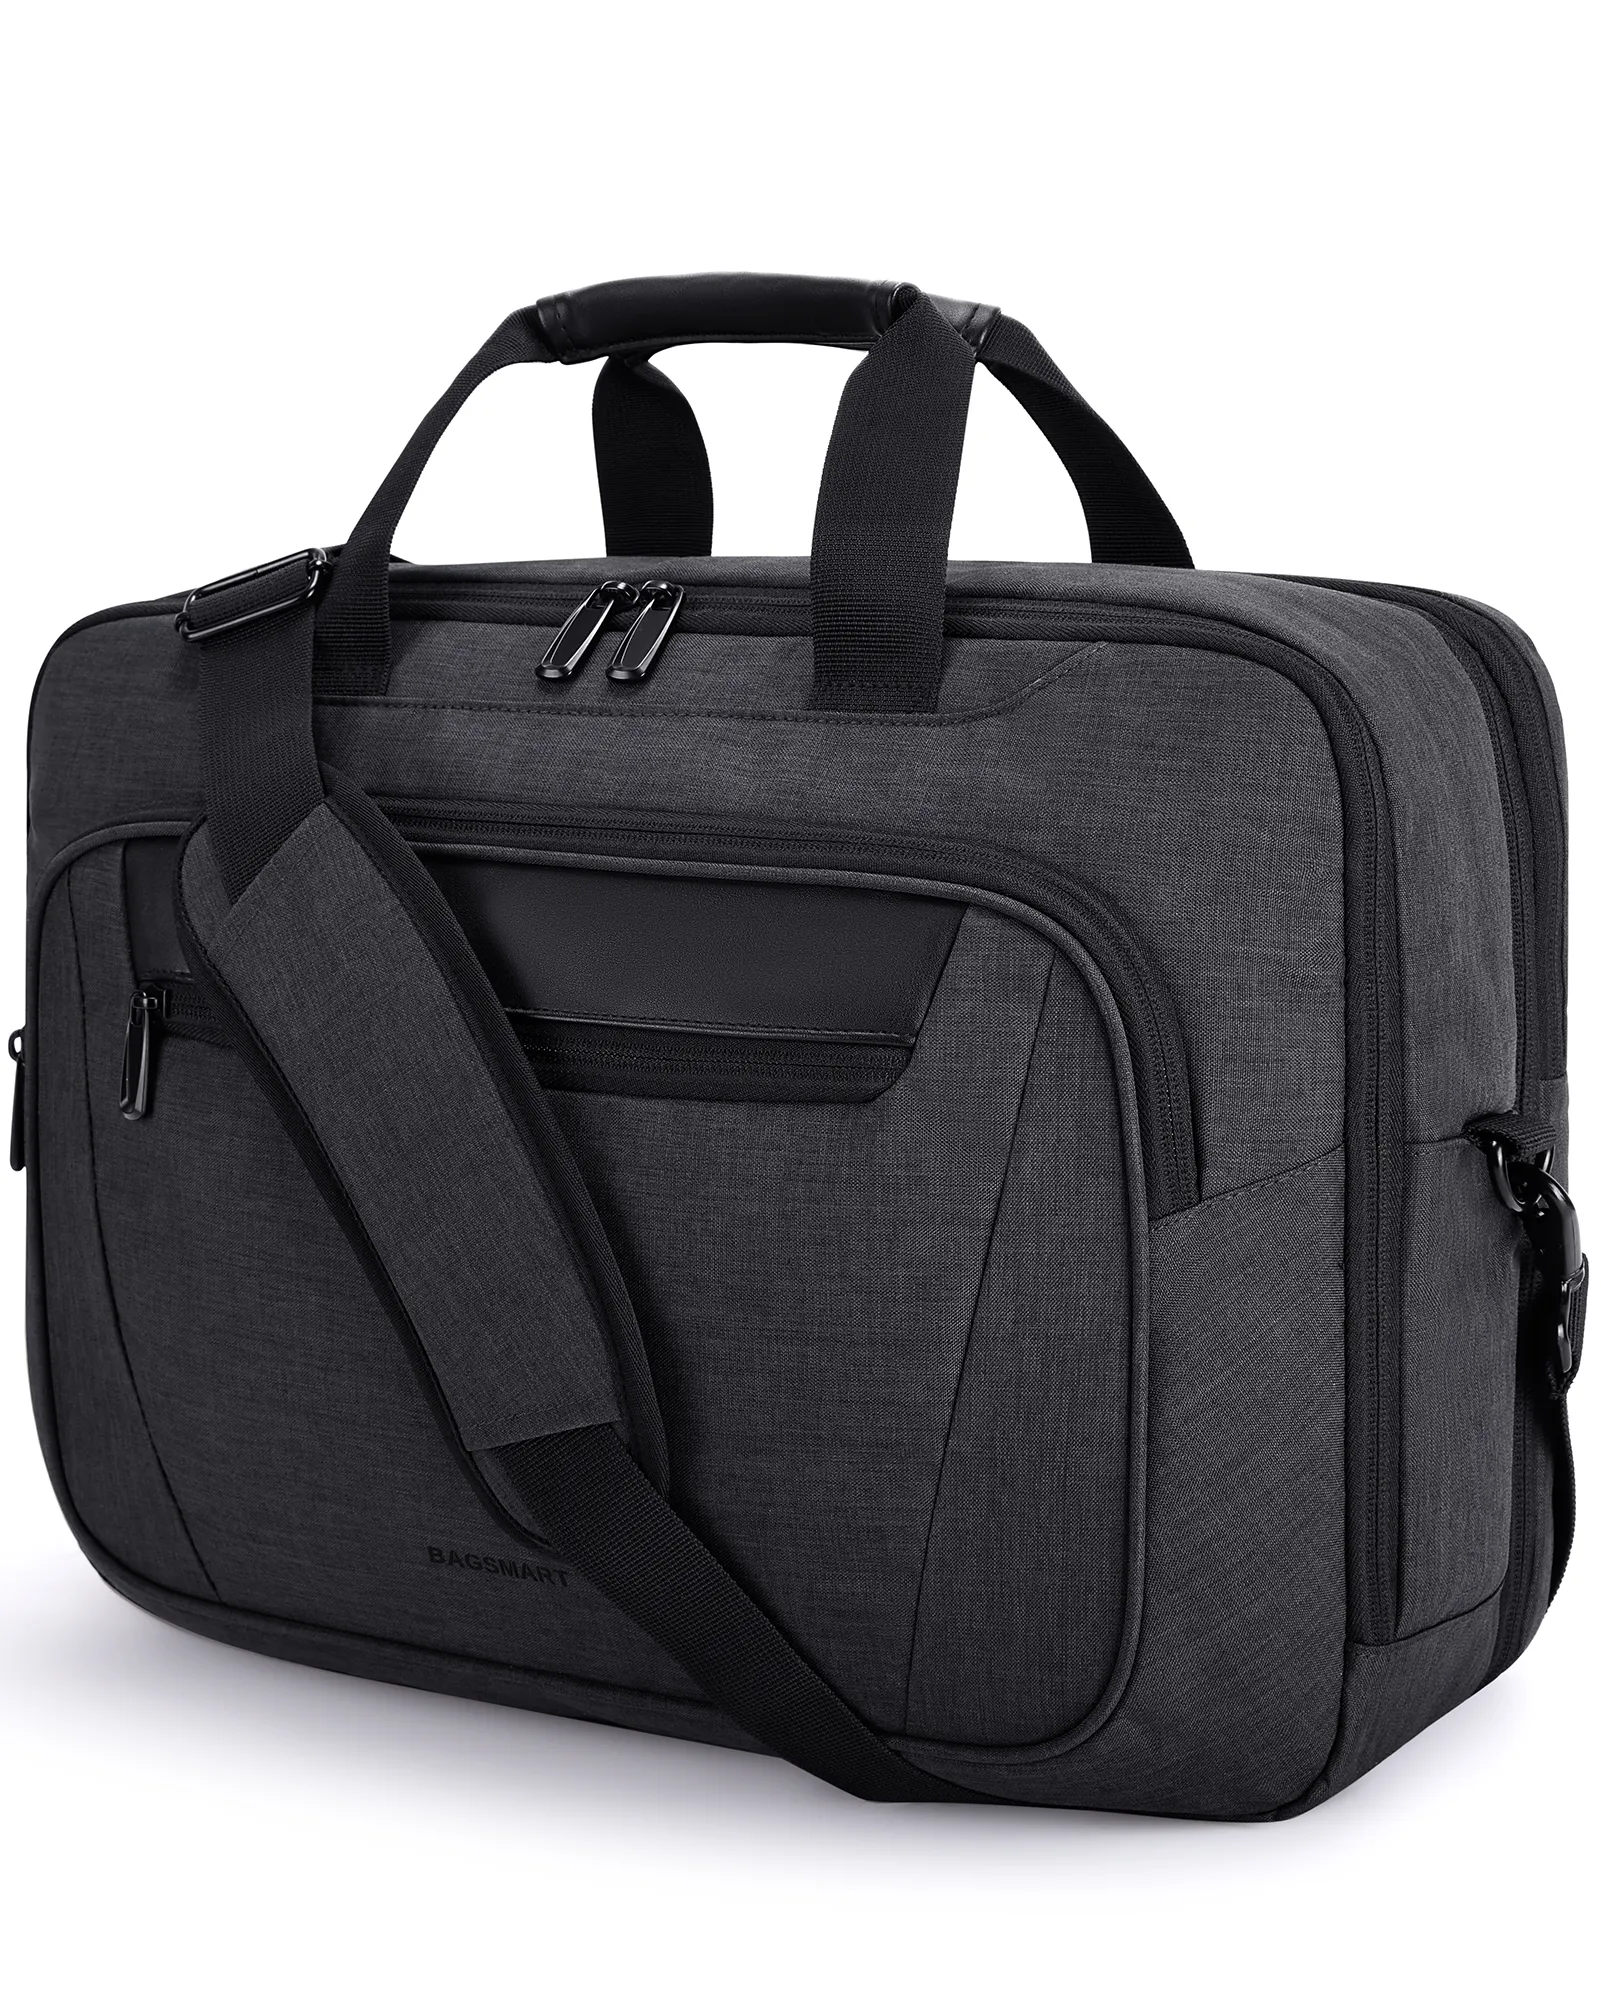 Briefcase With Shoulder Strap: BAGSMART 30L Expandable Laptop Briefcase for Men, Ideal for Work, Business, College, and Travel (17.3-inch)